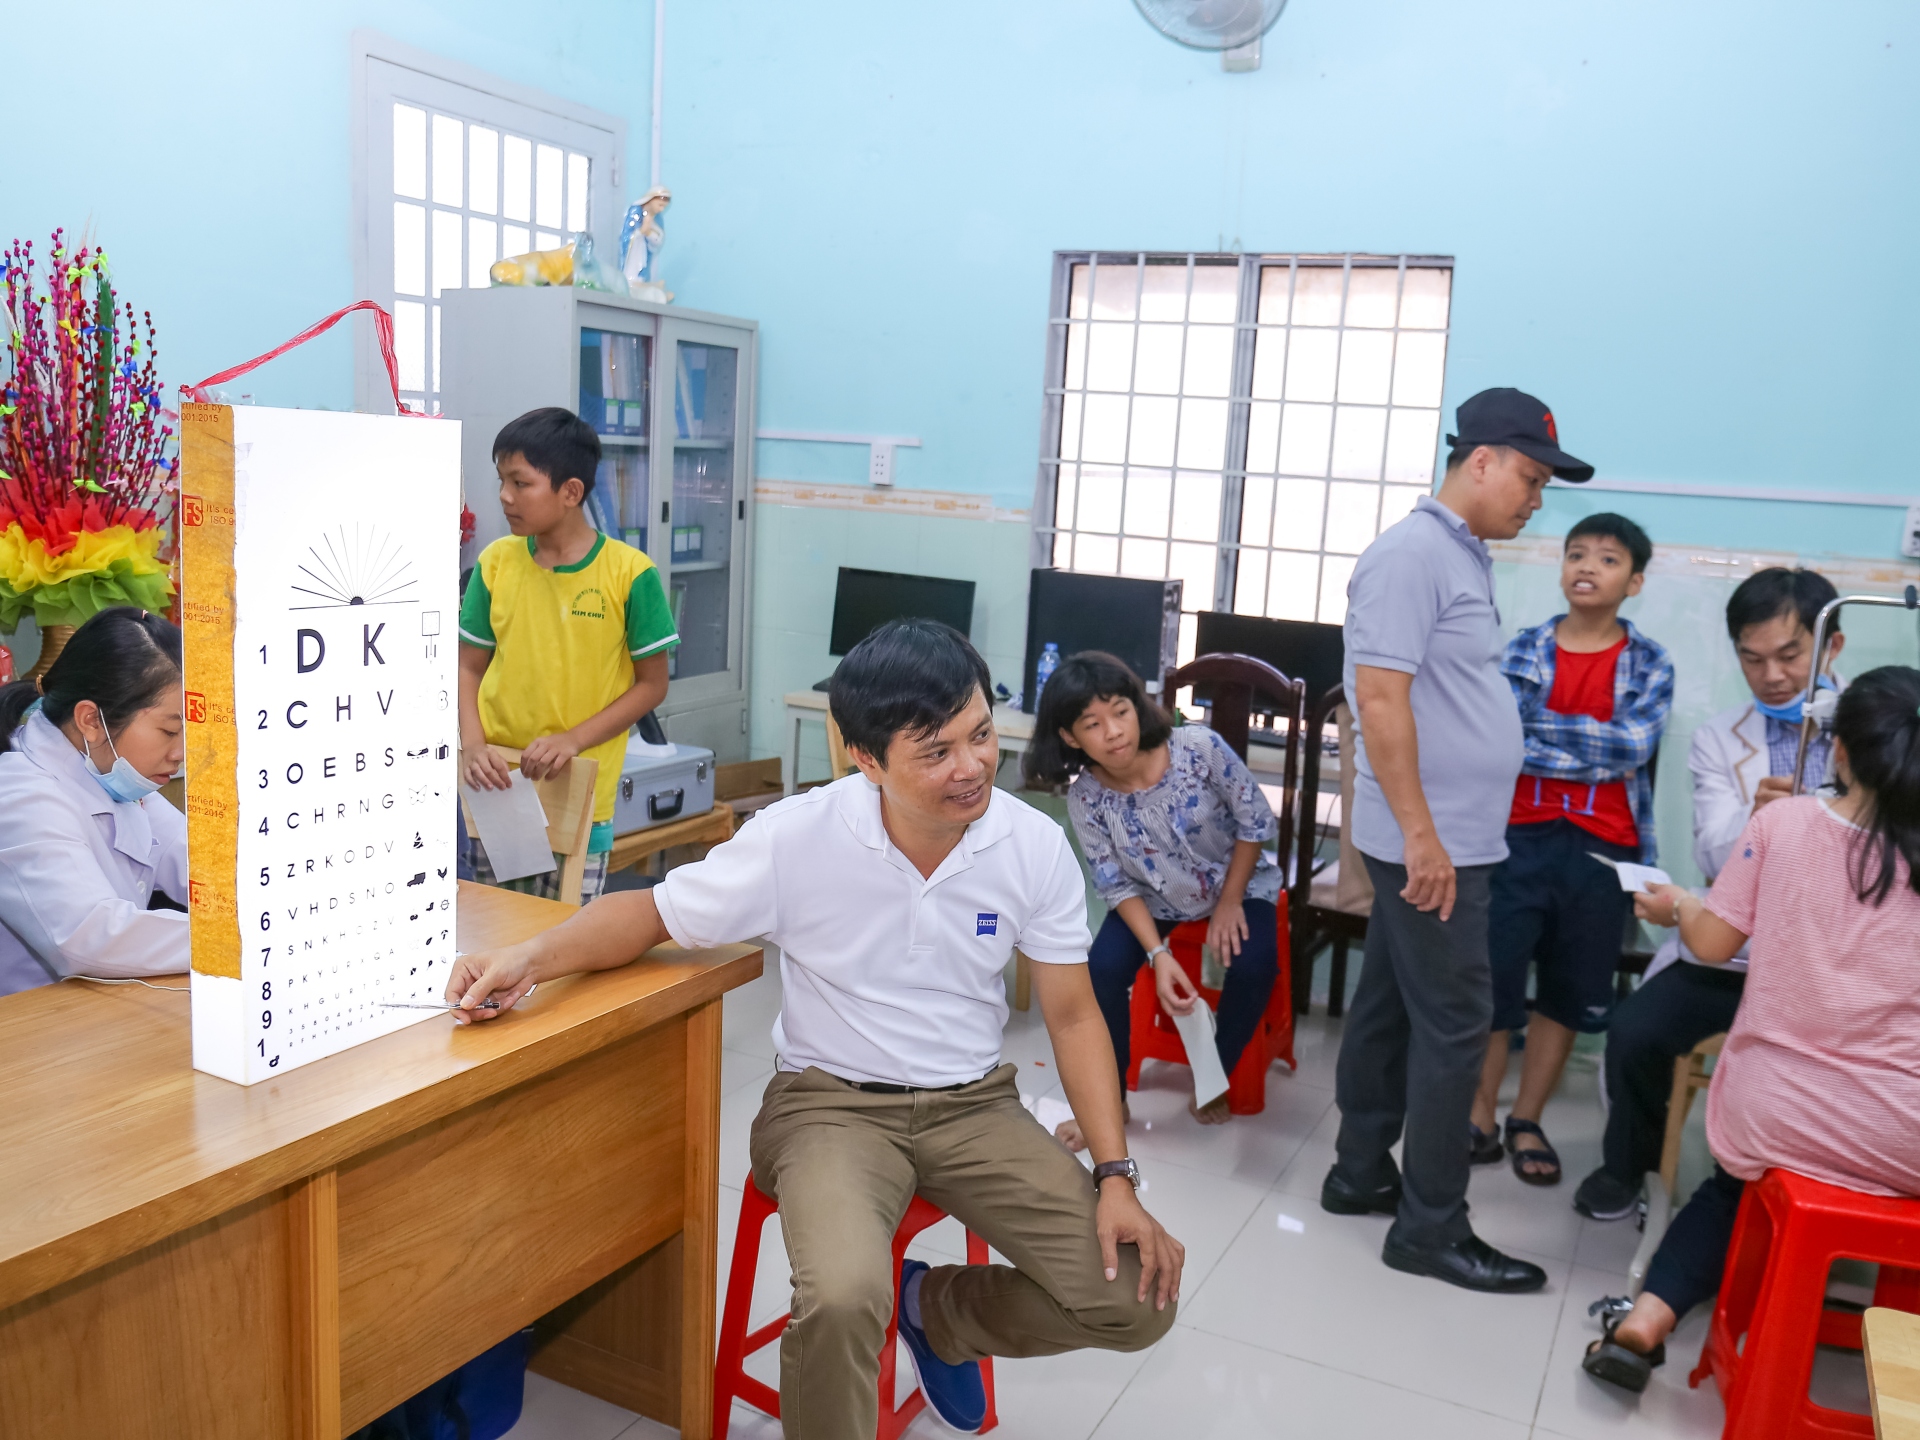 A doctor performs an eye exam on children pointing at a chart for the examination